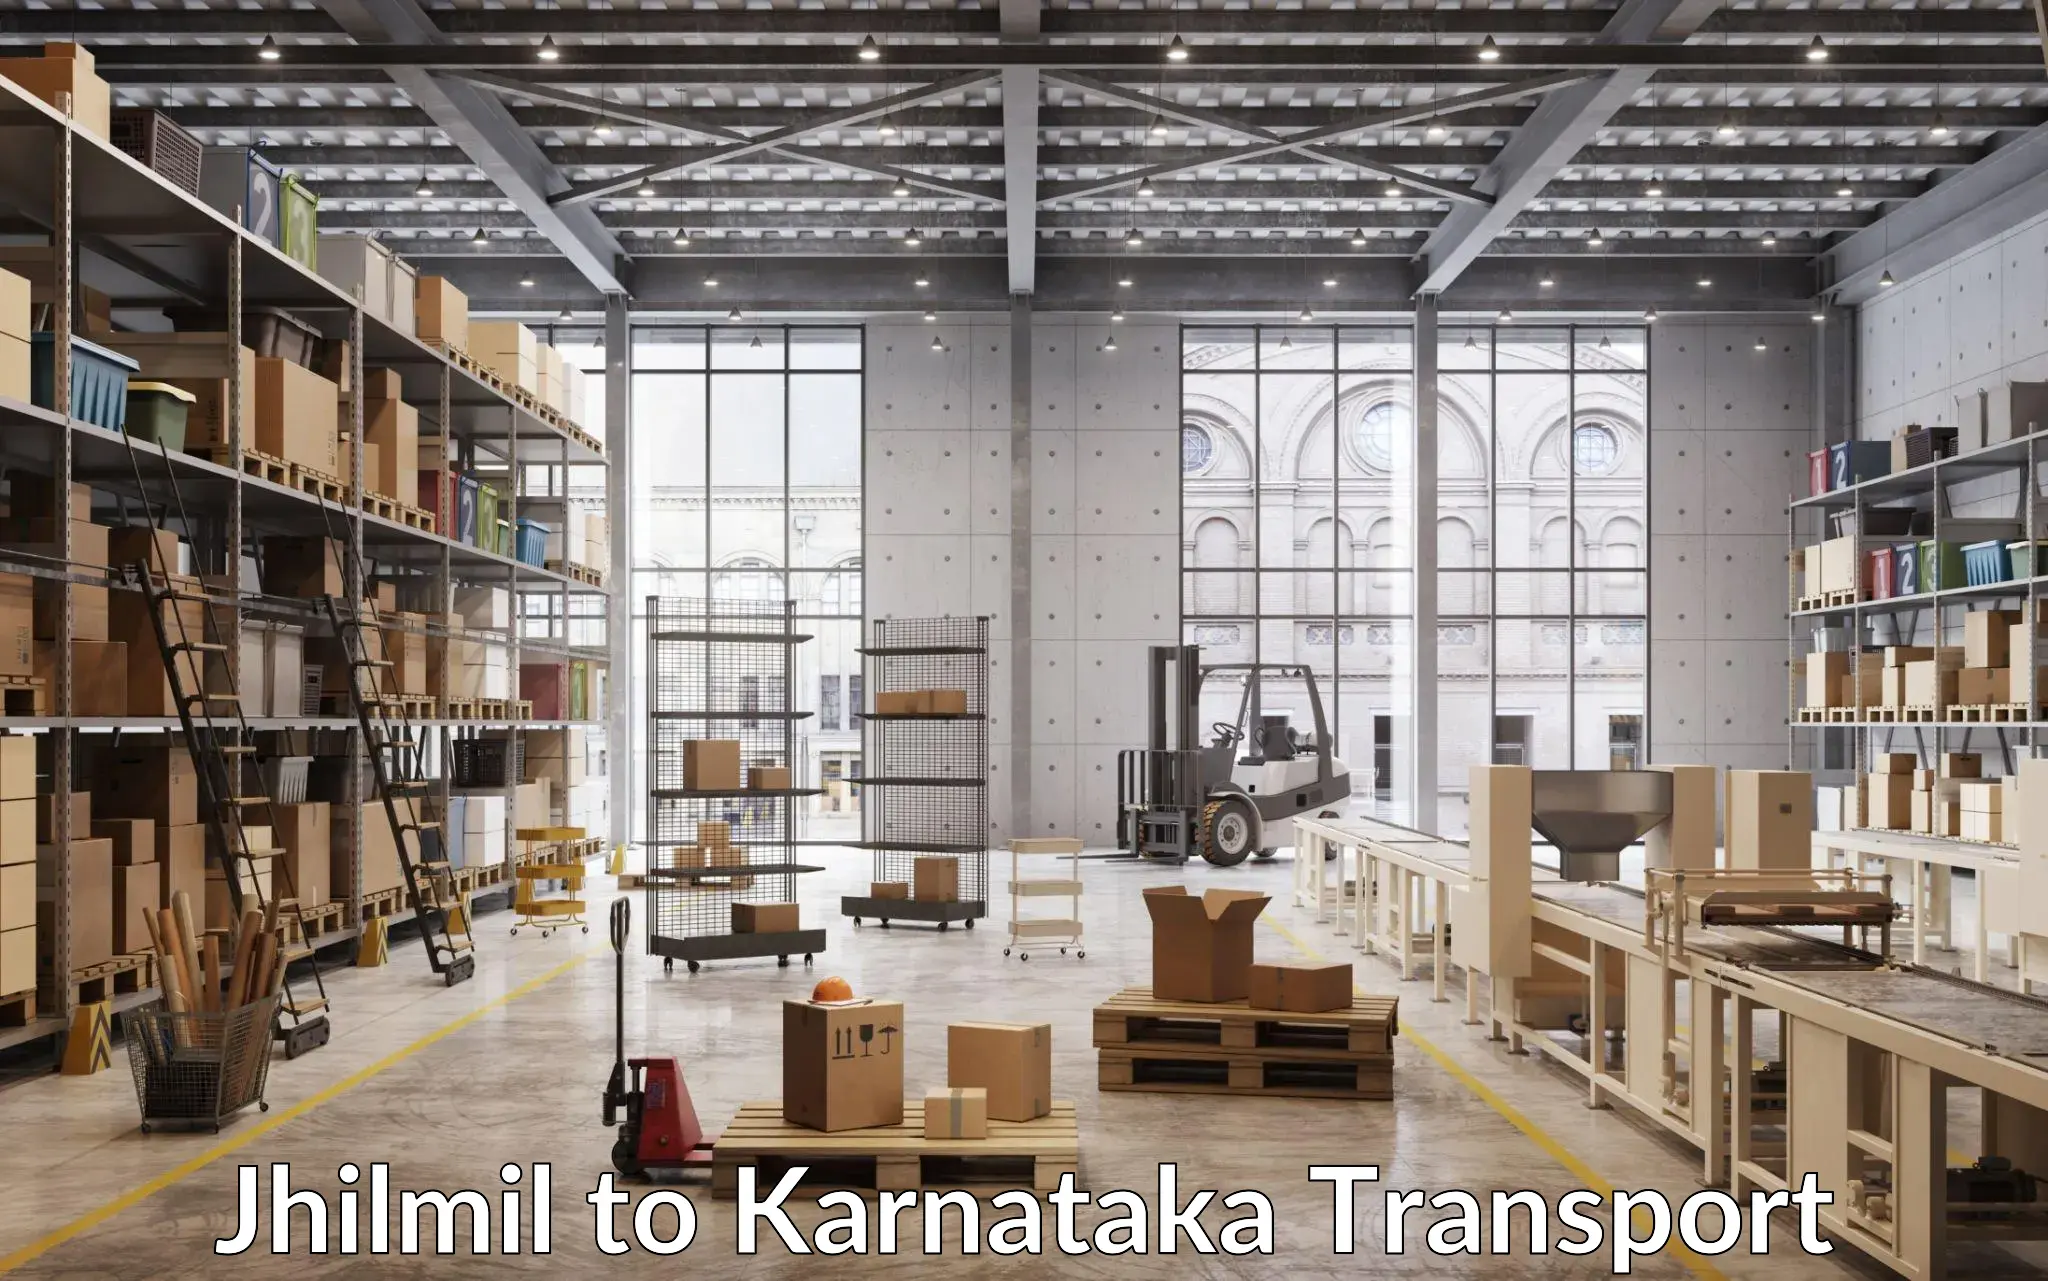 Container transportation services Jhilmil to Karnataka